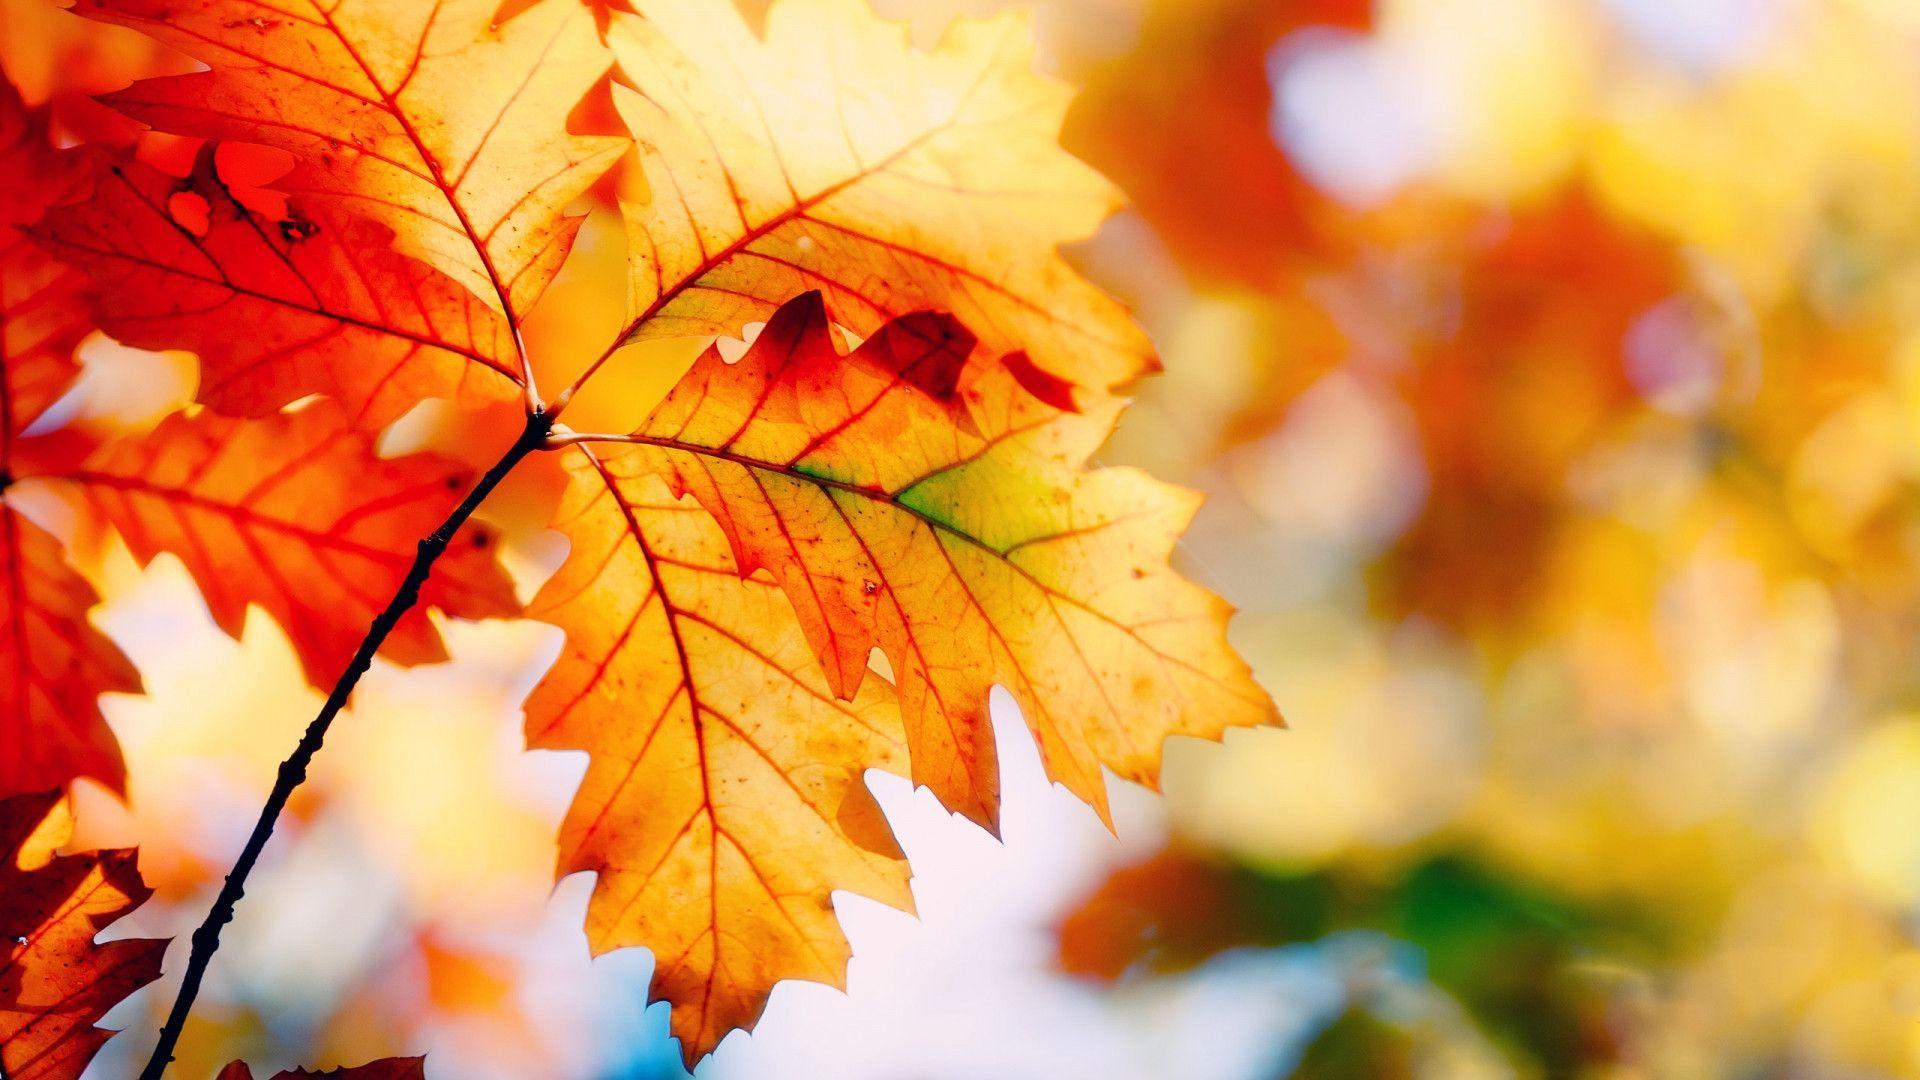 The Harmony Of Autumn Wallpaper For 1920x1080 Hdtv 1080p 2439 15